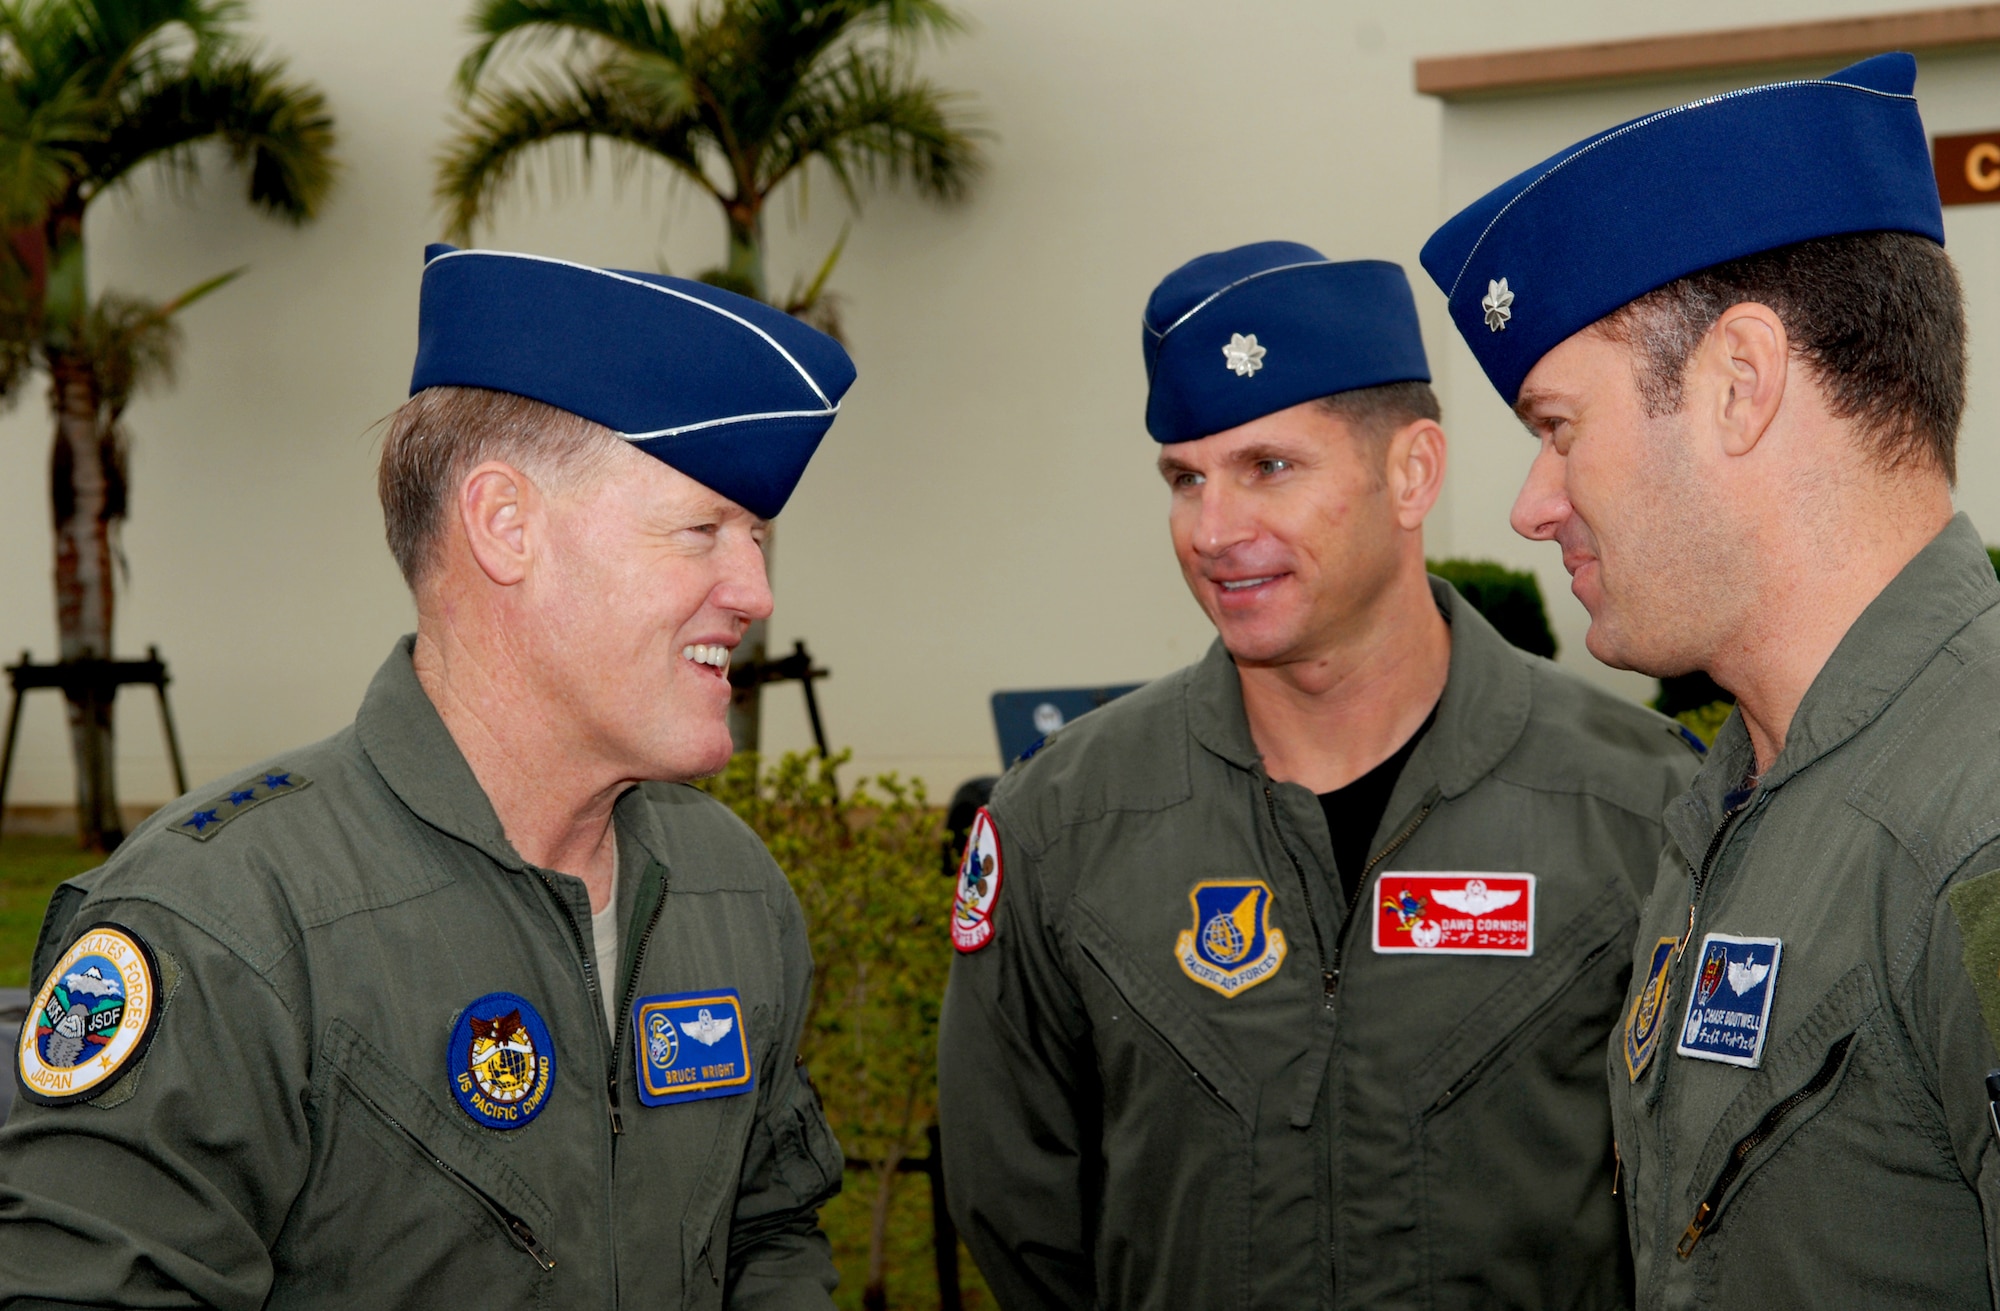 Lt. Col. Barry Cornish, 67th Fighter Squadron commander, and Lt. Col. Rick Boutwell, 44th Fighter Squadron commander, greet Lt. Gen. Bruce A. Wright during his visit to Kadena AB, Japan, Jan. 29. General Wright gave thanks to all the Airmen for their service and the importance of their mission. (U.S. Air Force photo/Chrissy FitzGerald)